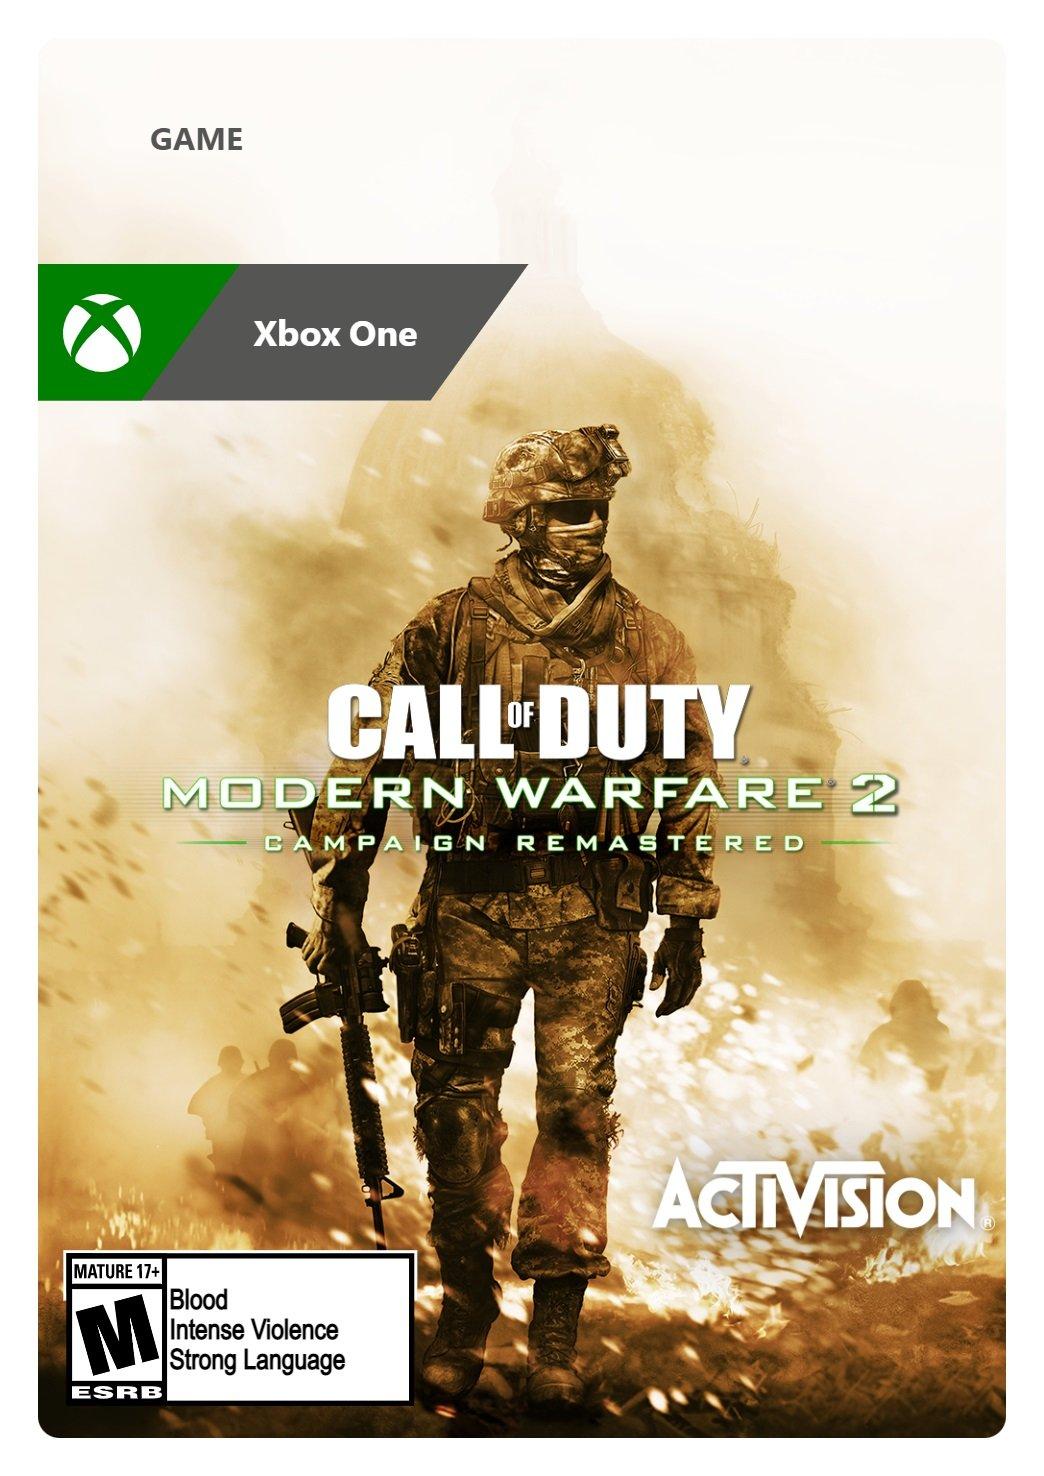 Call of Duty: Modern Warfare 2 Campaign Remastered - Xbox One, Xbox One